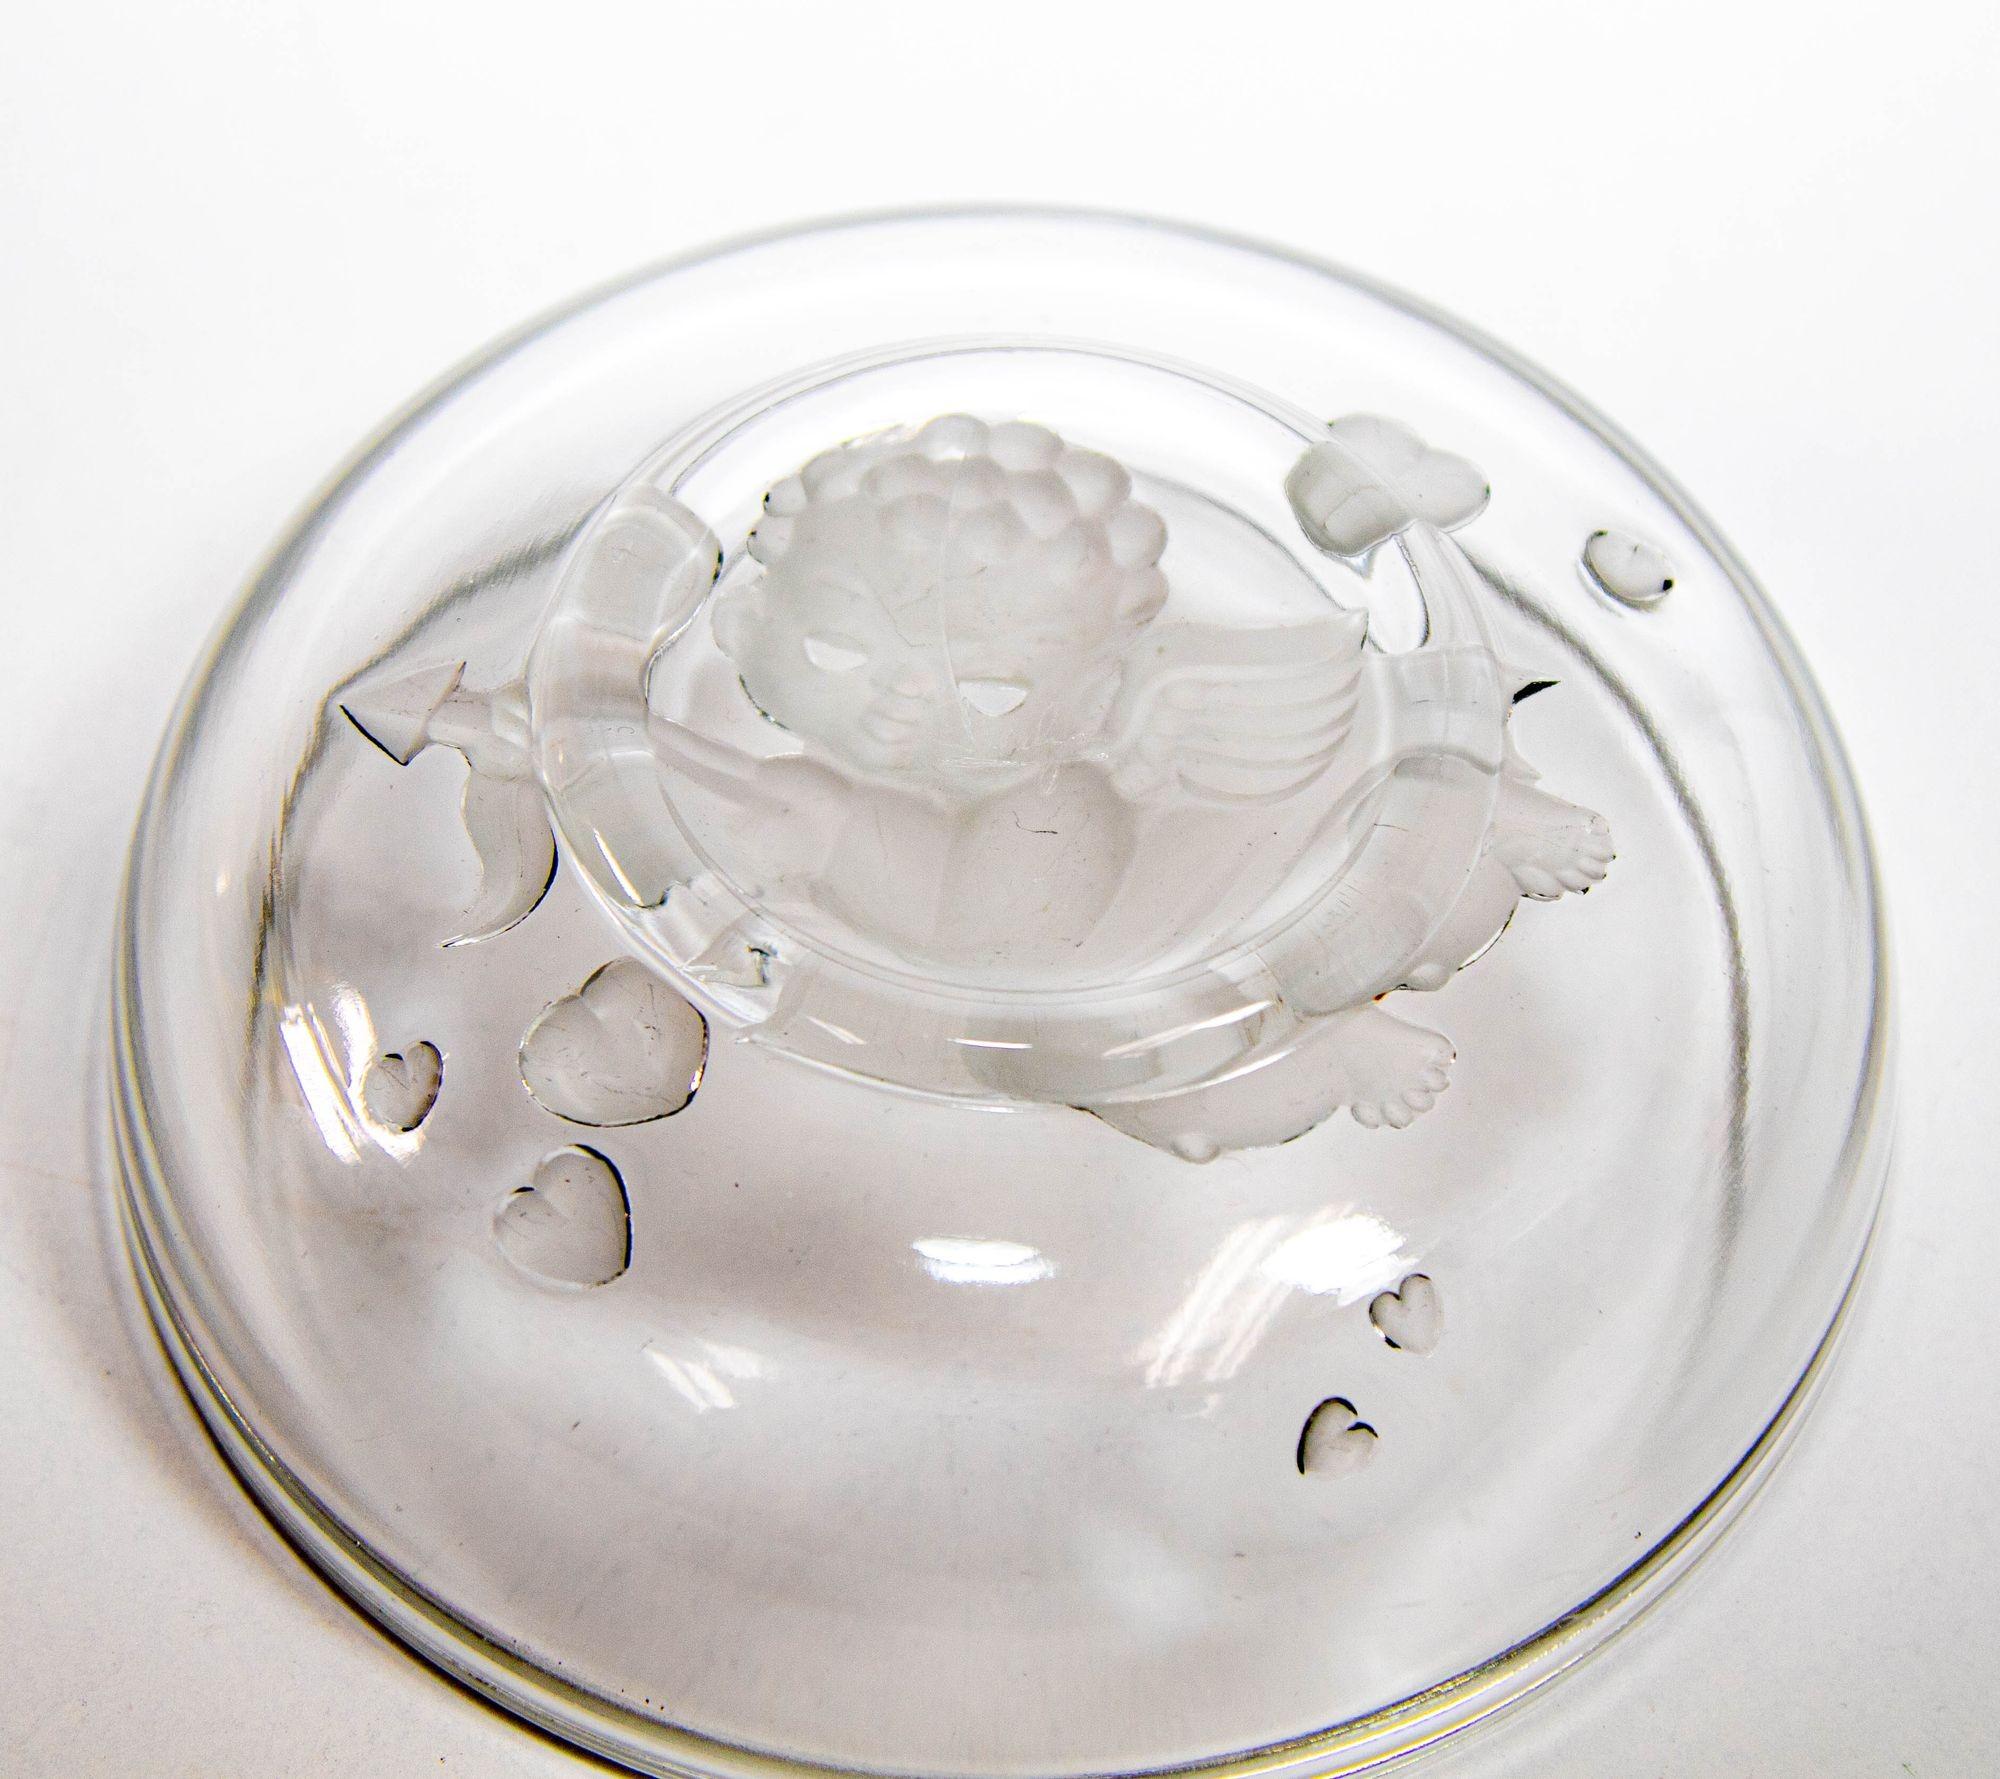 VVintage Signed Verlys crystal glass round bowl with Cupid Cherub angel with a bow.
A Lalique-style glass, a vintage Verlys opalescent glass Art Deco style satin embossed frosted clear glass dish with cupid and hearts candy trinket catchall vide